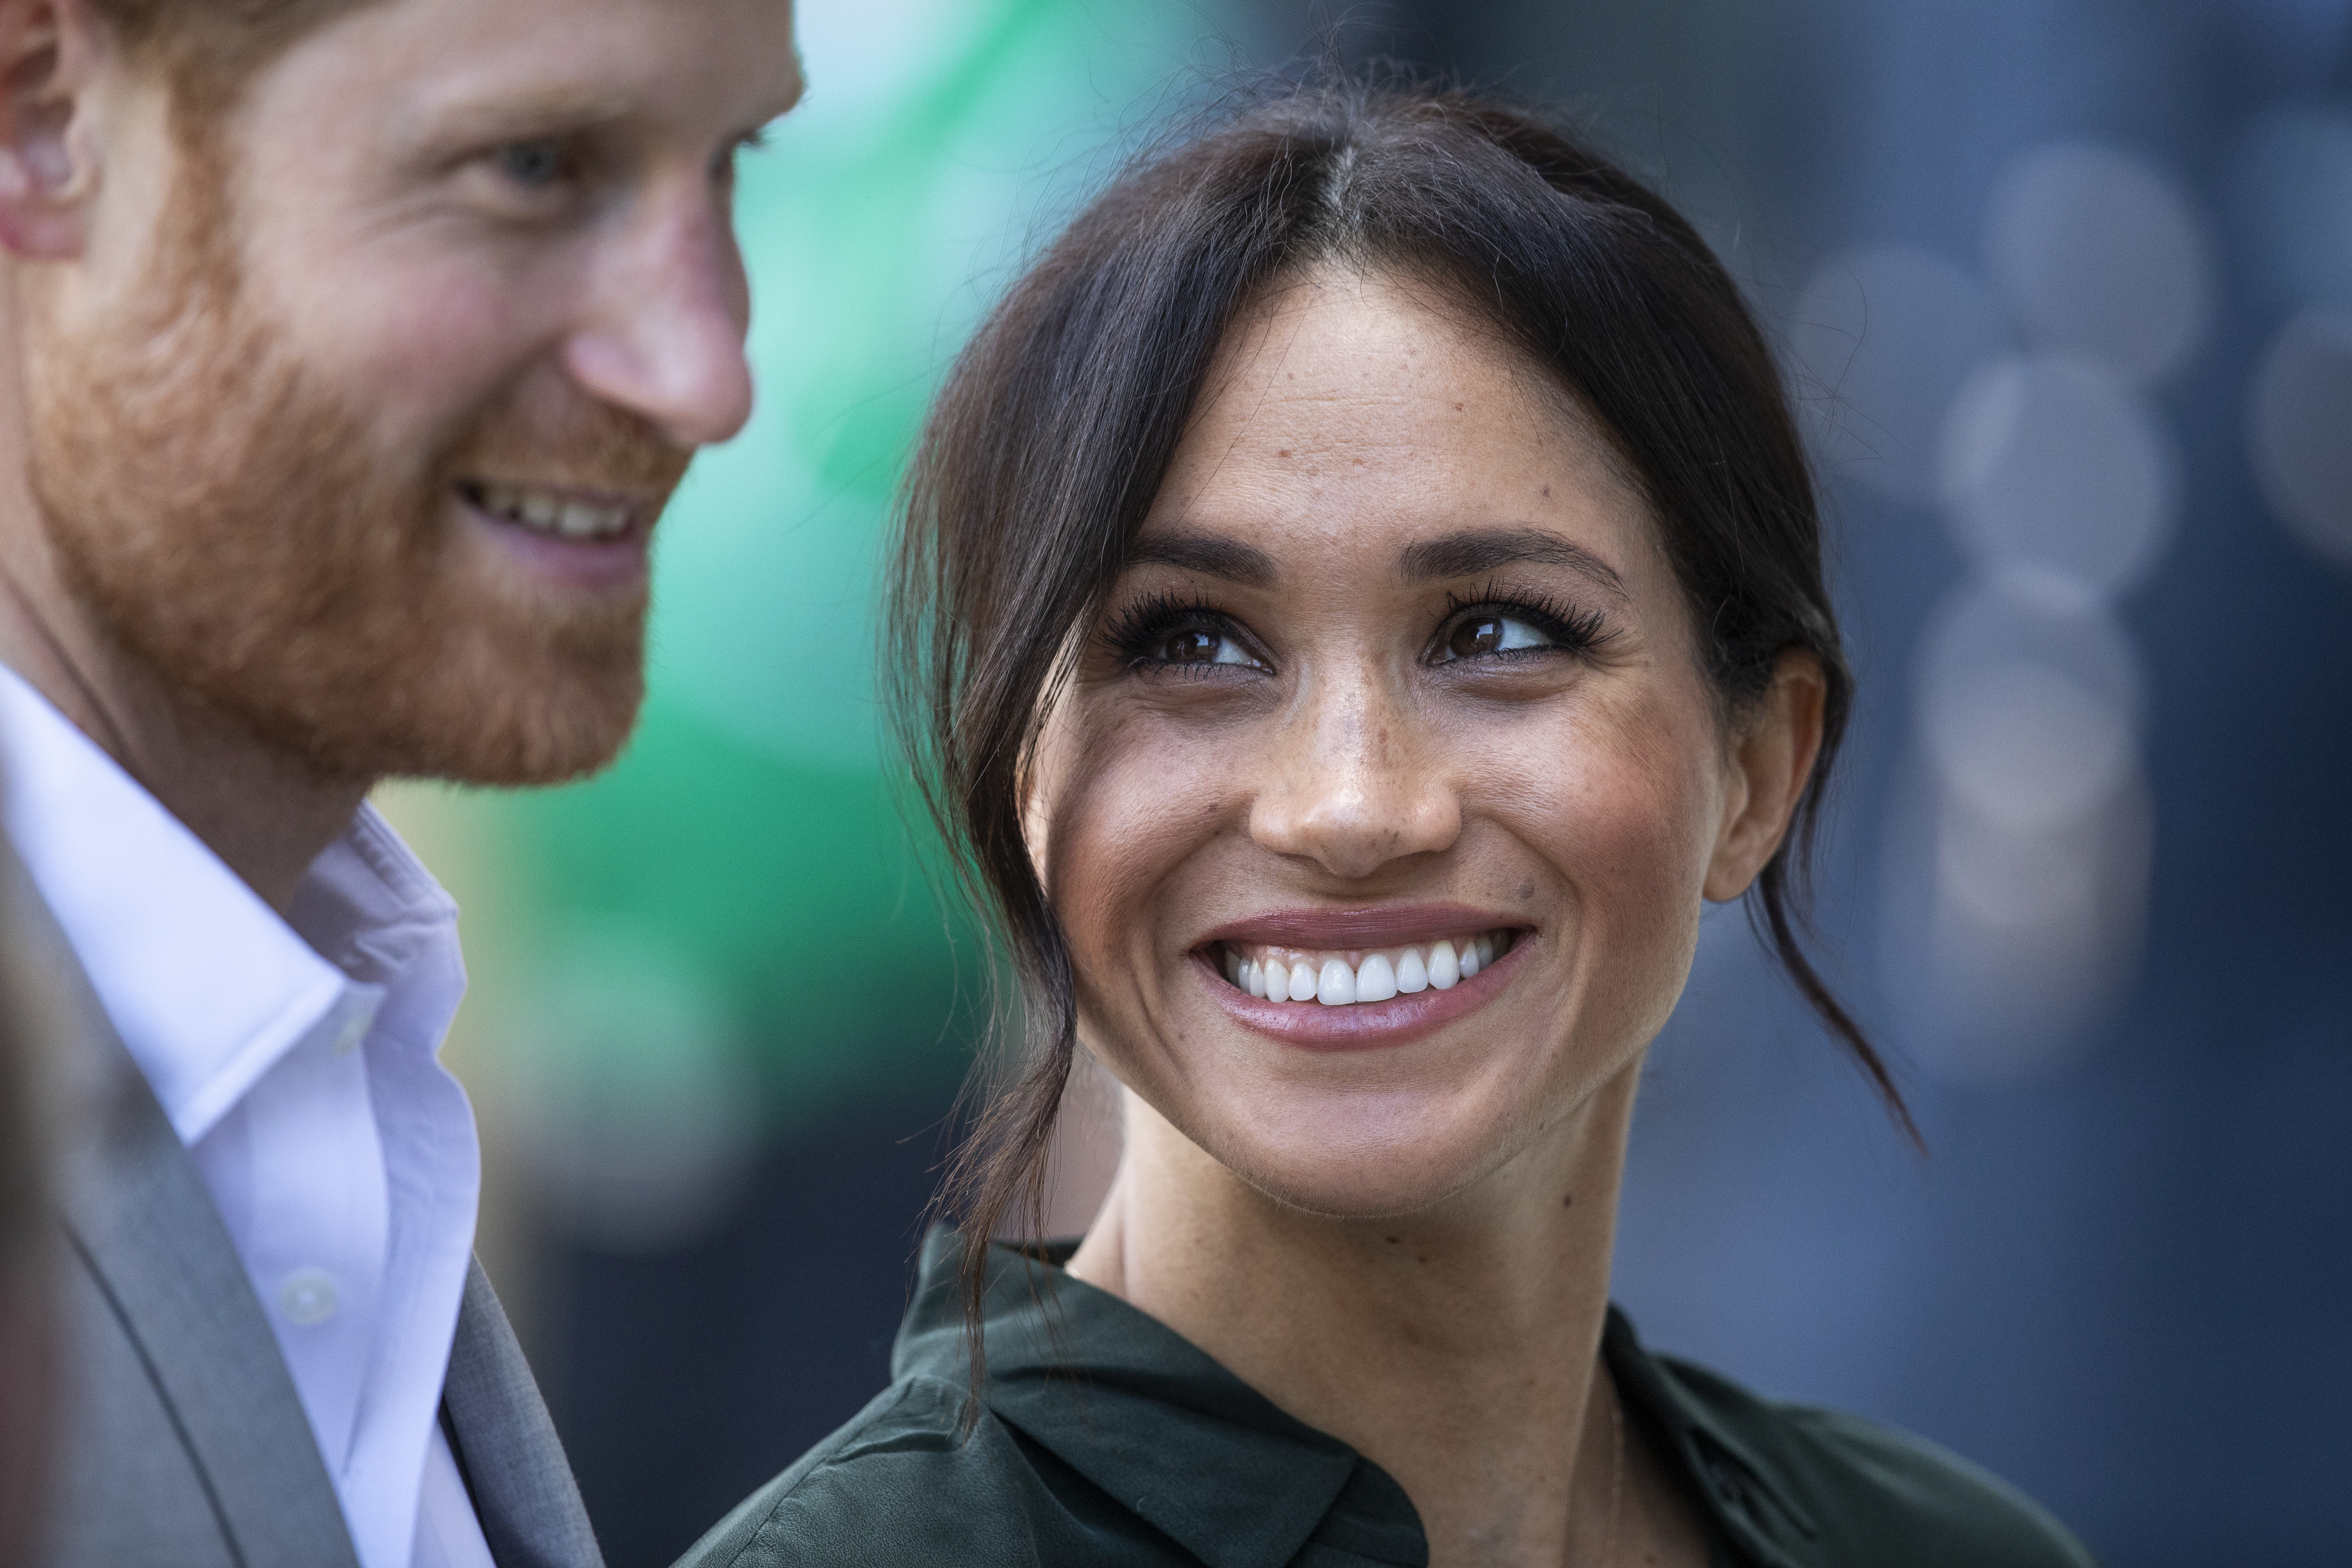 Prince Harry and Meghan Markle visiting Sussex in 2018 | Source: Getty Images